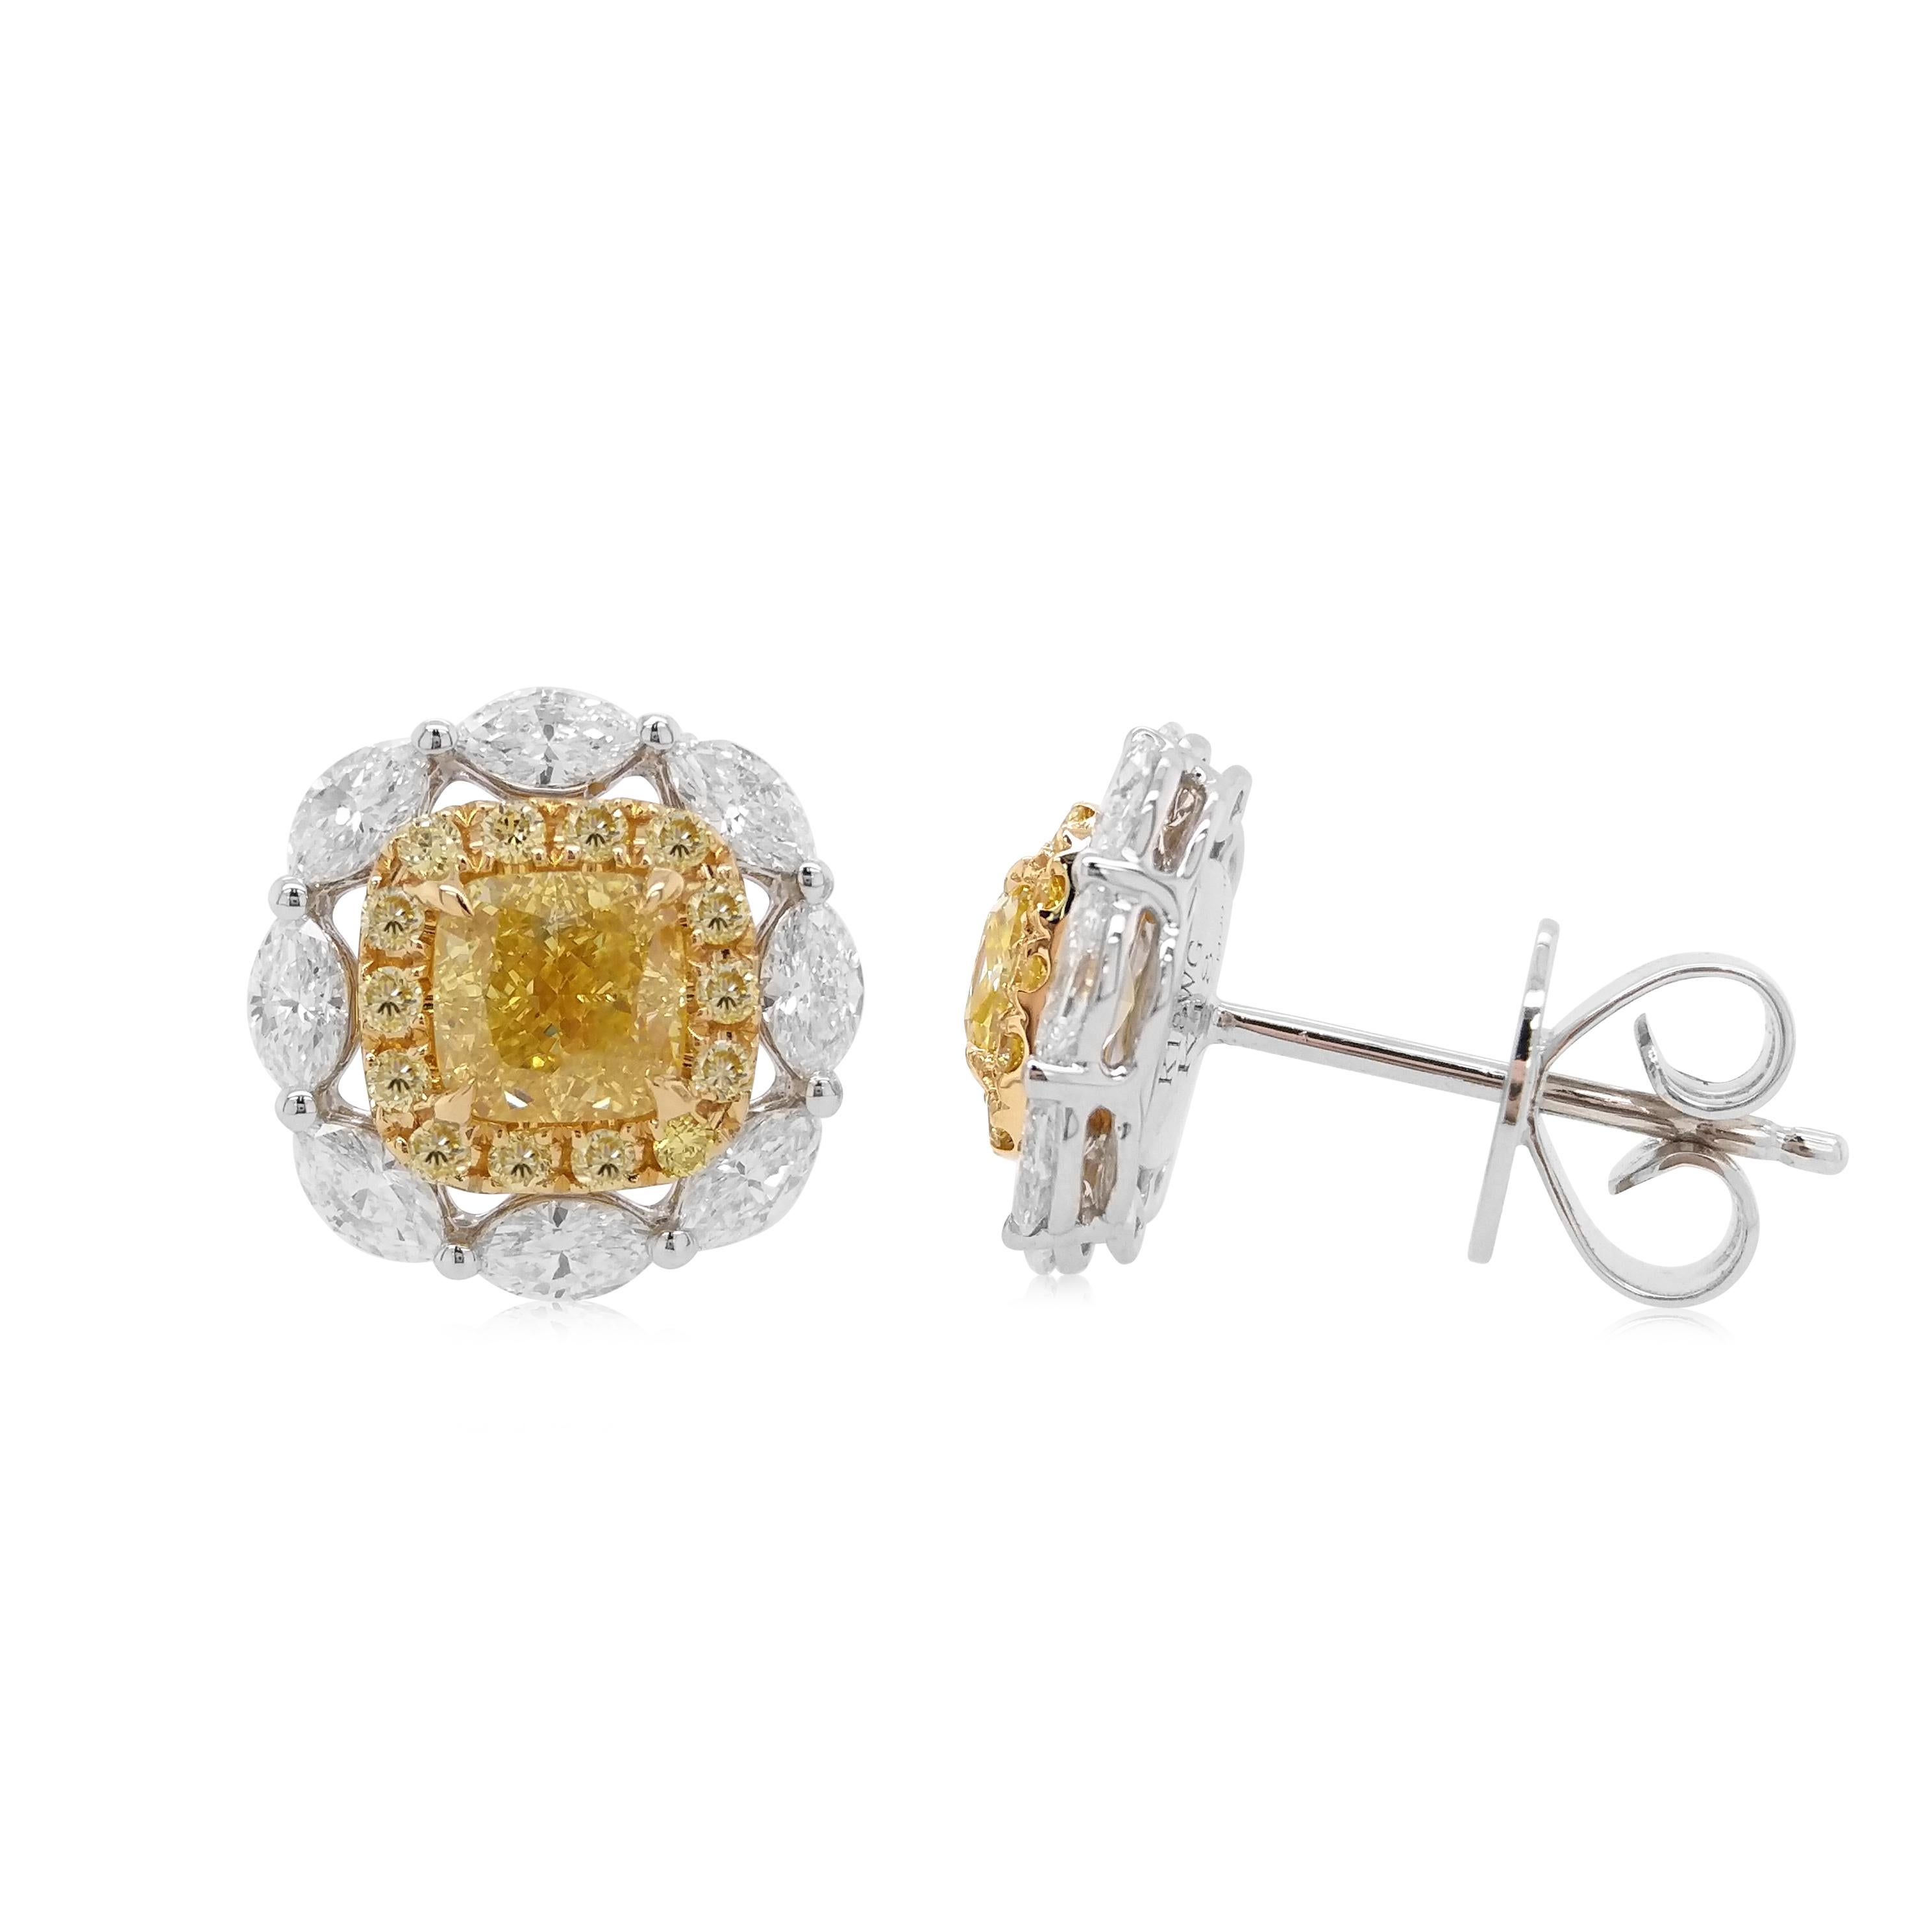 These timeless earrings feature lustrous Square-Radiant-Cut Yellow diamonds surrounded by a delicate scintillating marquise-shaped white diamond halo. These earrings are a contemporary classic and will make the perfect addition to any jewellery